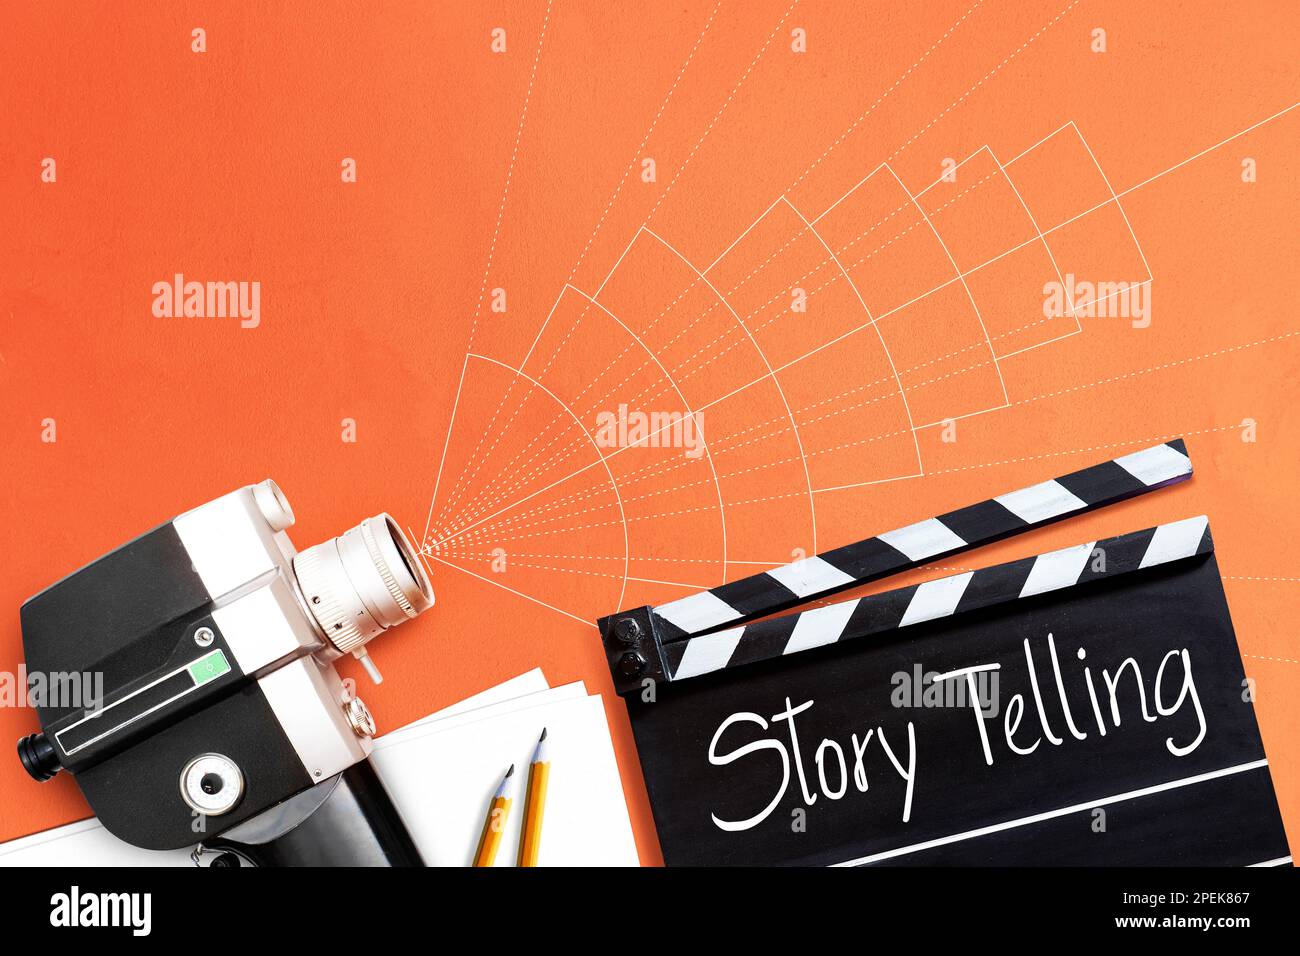 Story telling. text title on film slate or clapperboard and the old 8mm movie film camera for filmmaker and film industry. Stock Photo